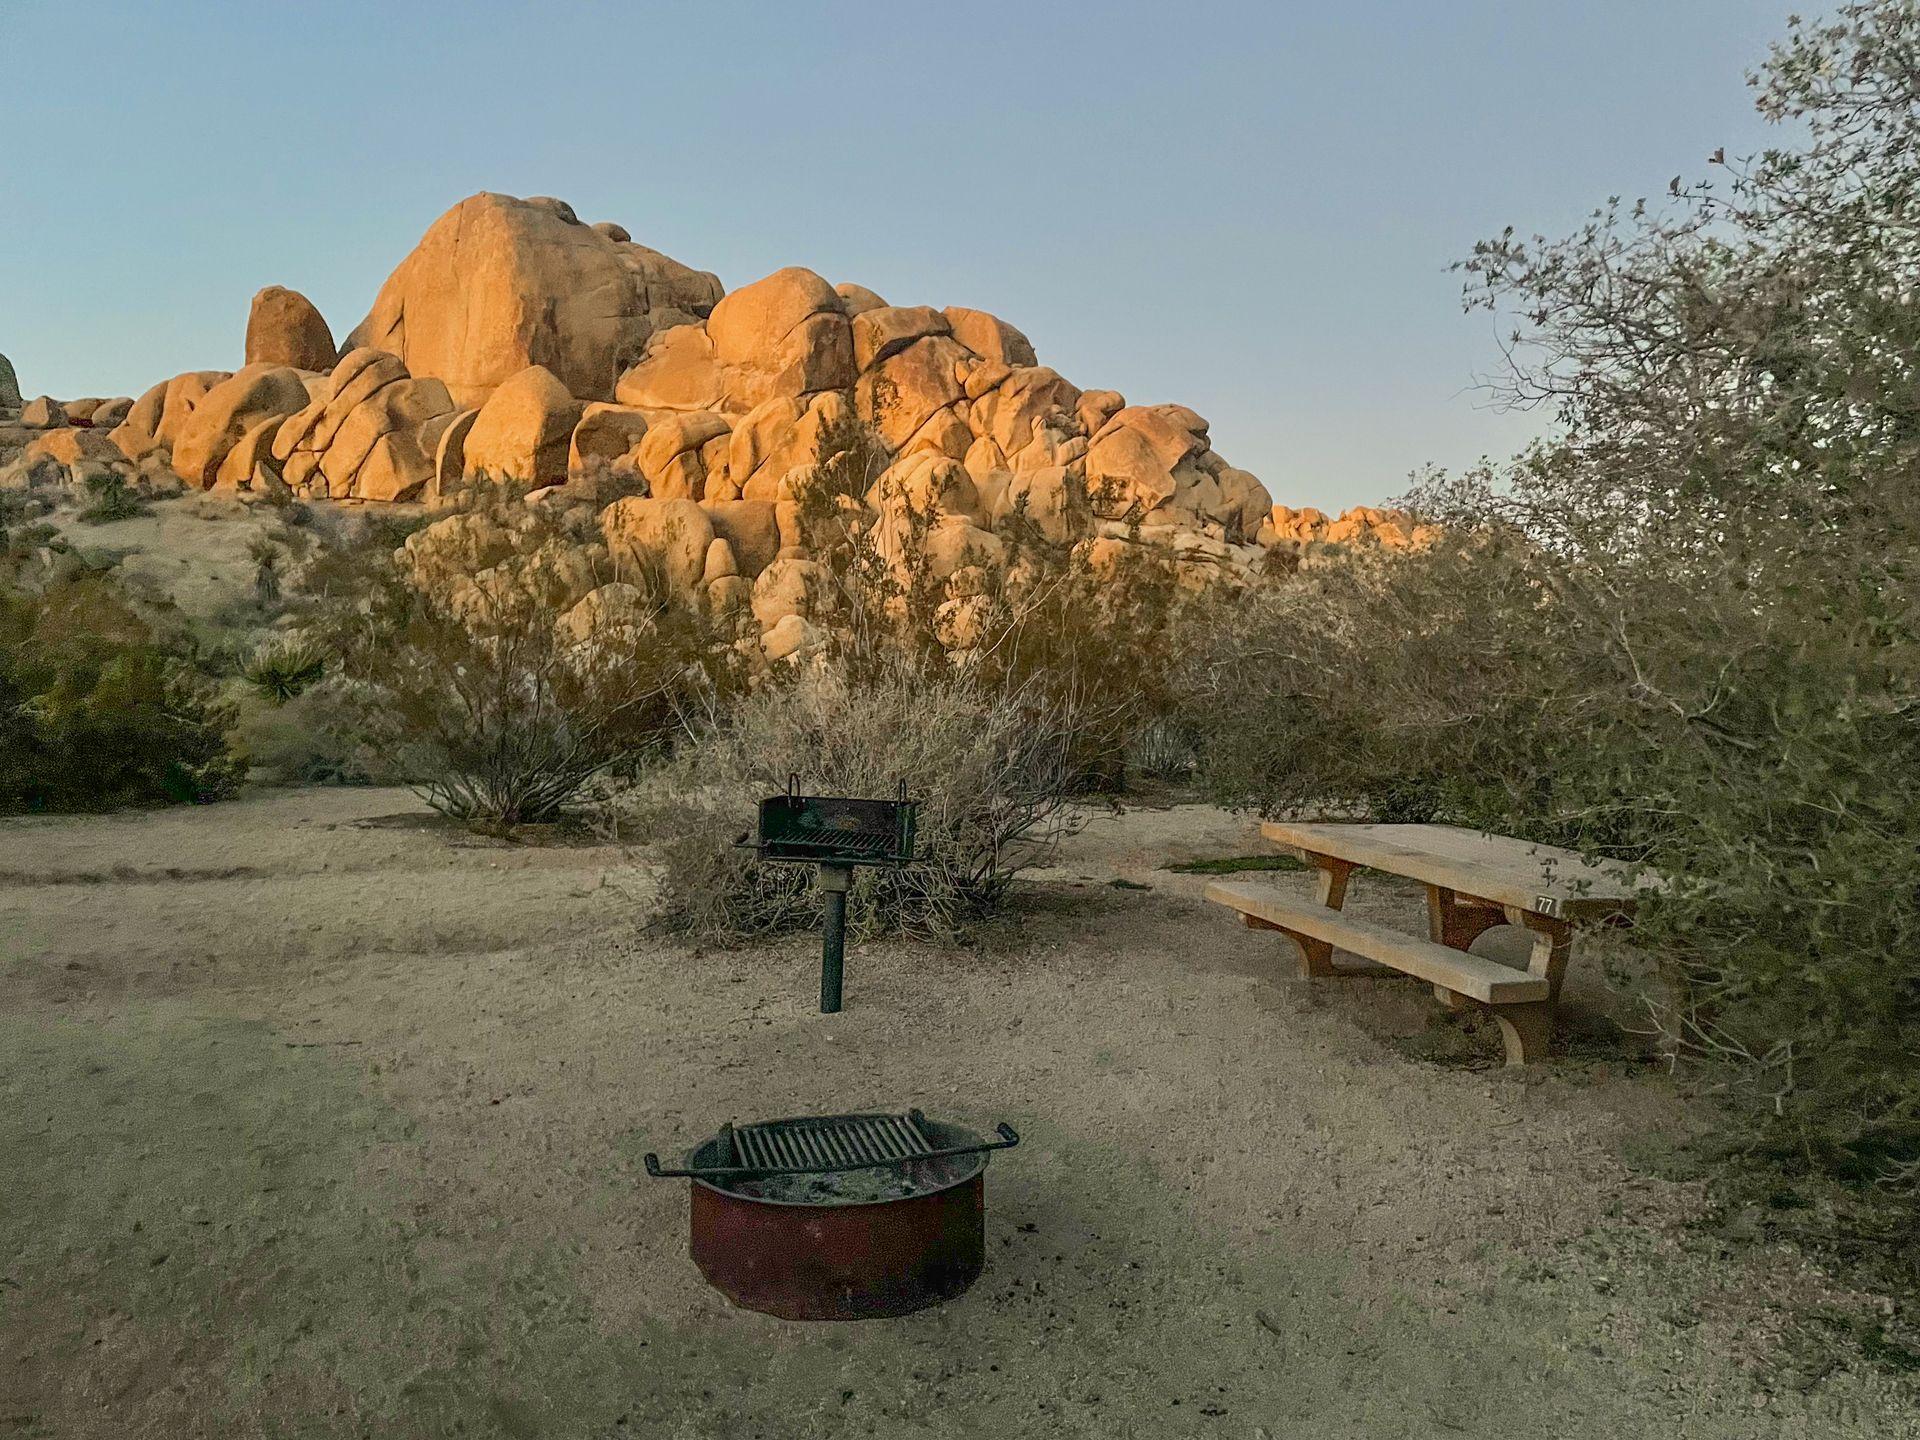 A campsite with a picnic table, fire pit and grill. Not far behind the campsite is a giant piles of boulders.